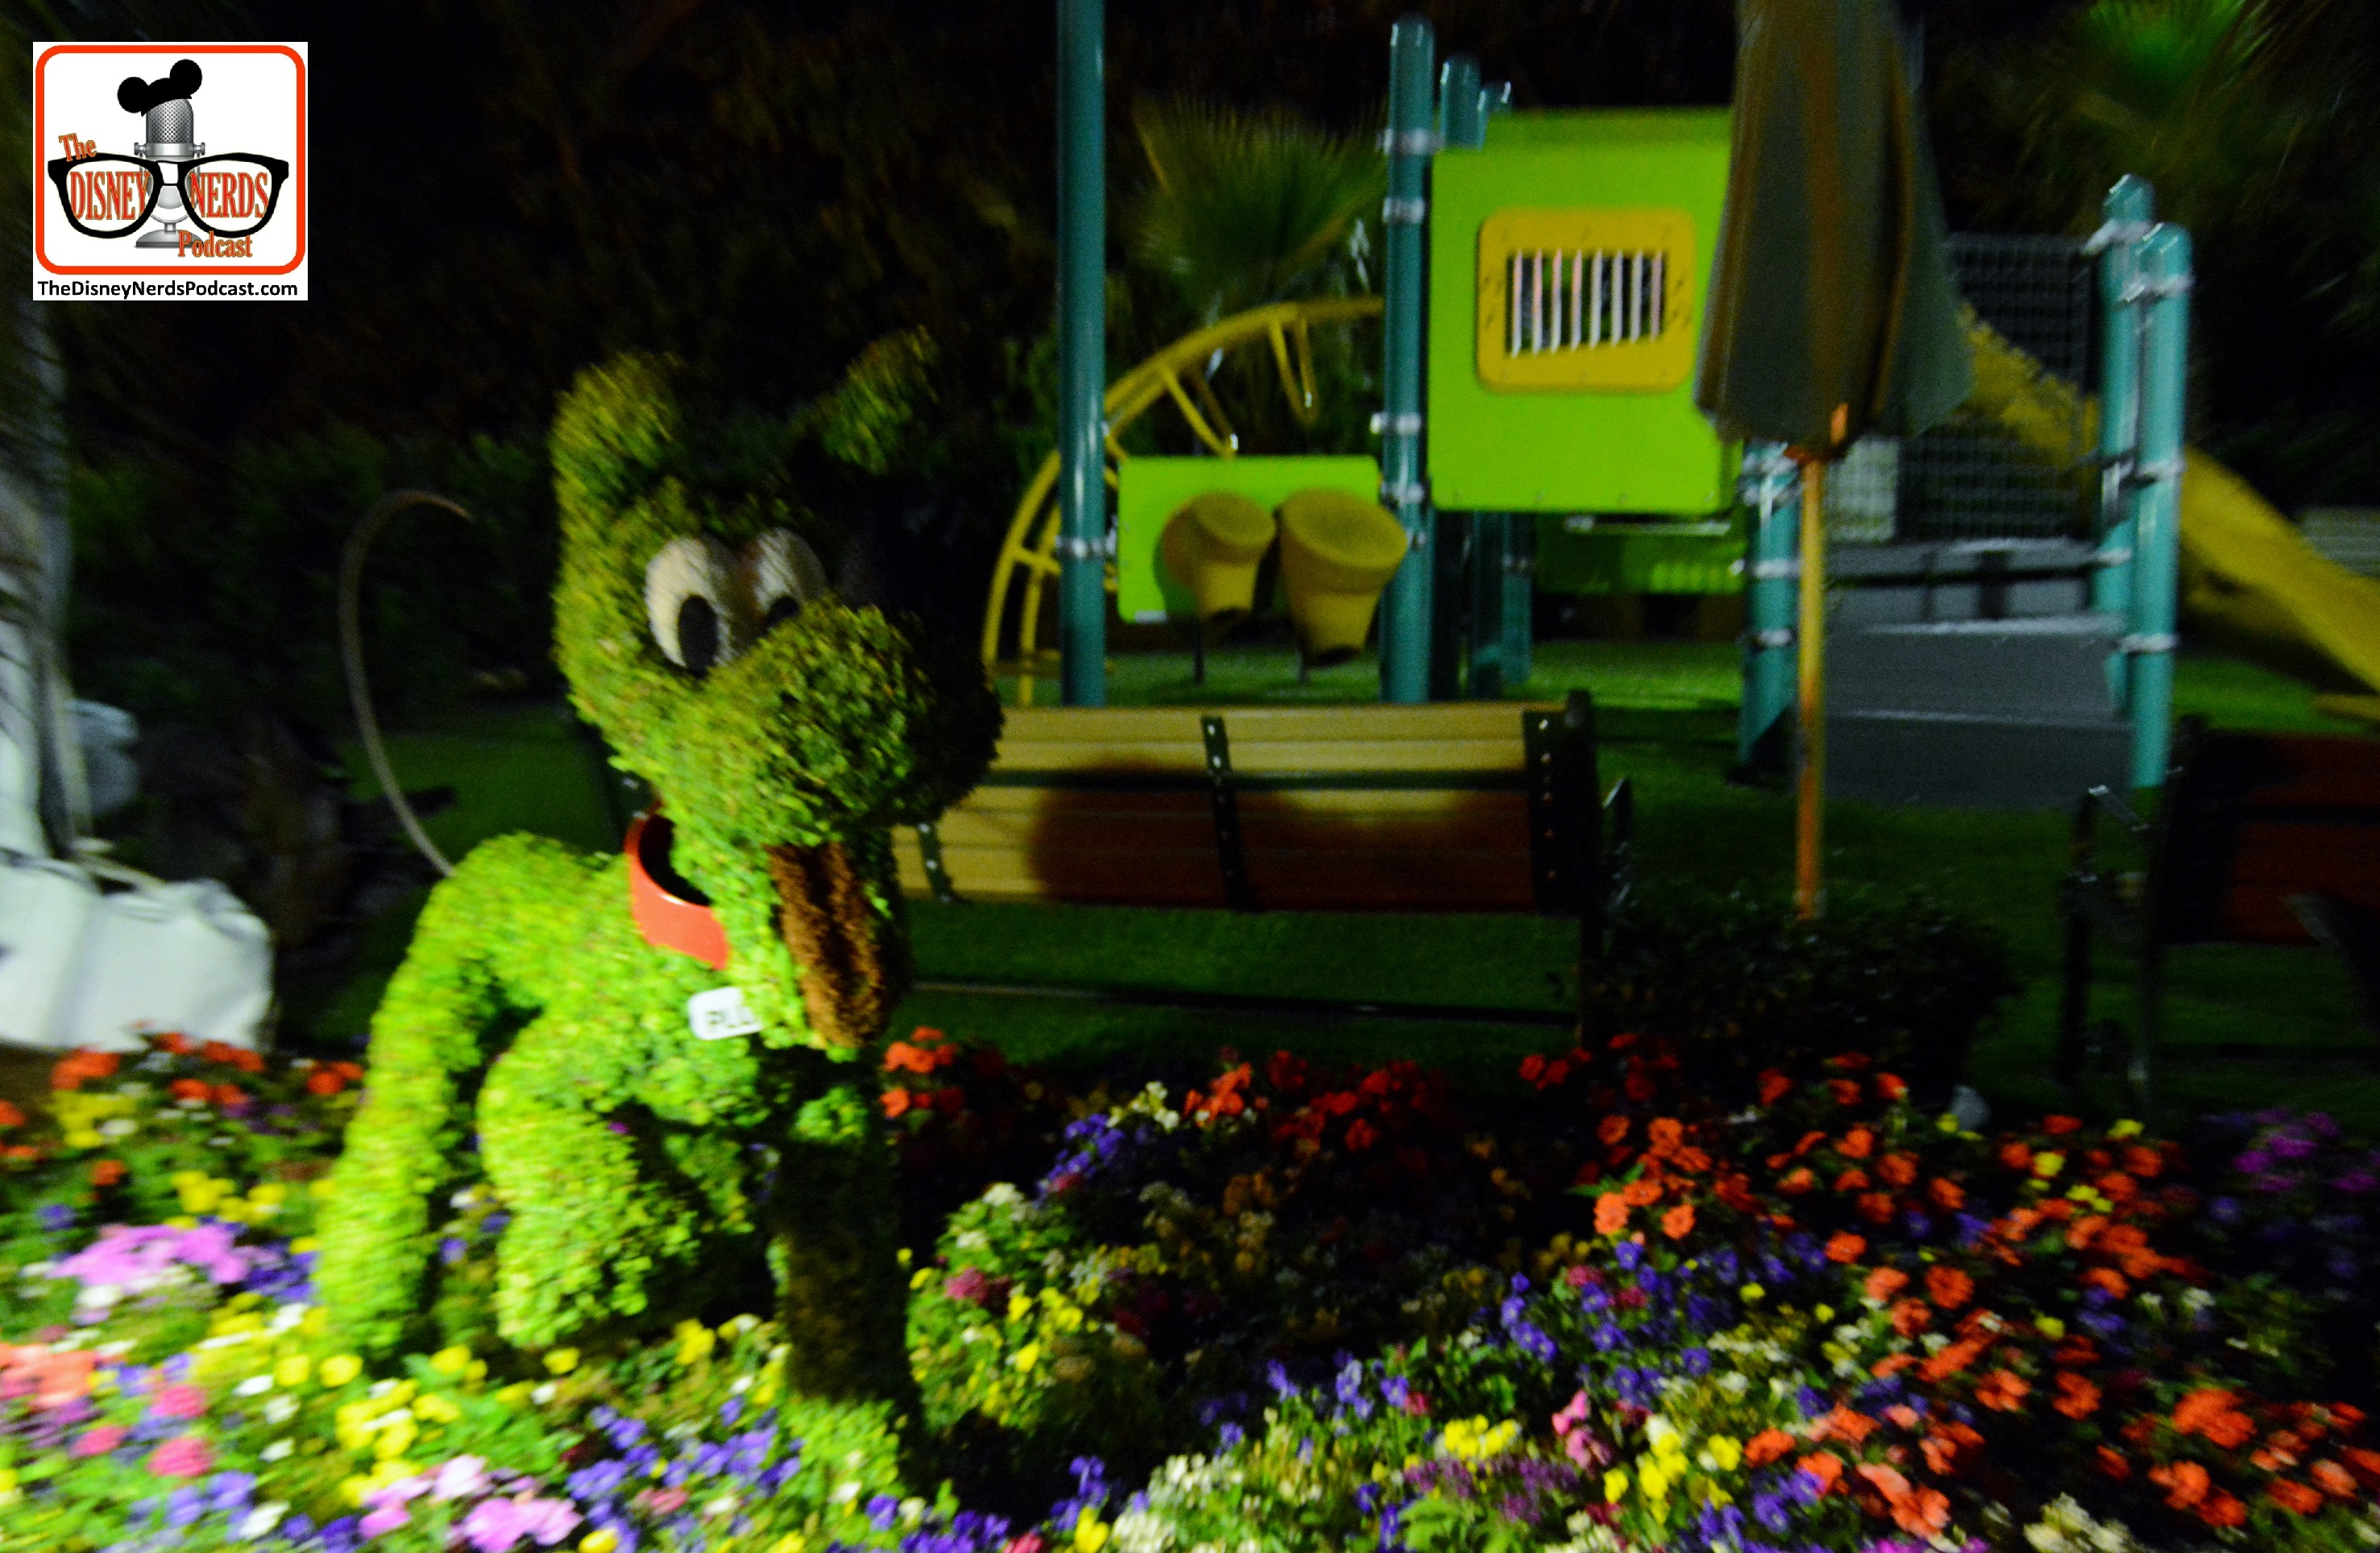 DNP April 2016 Photo Report: Epcot Flower and Garden Festival.. Topiary's at night in the Harmony Garden Playground